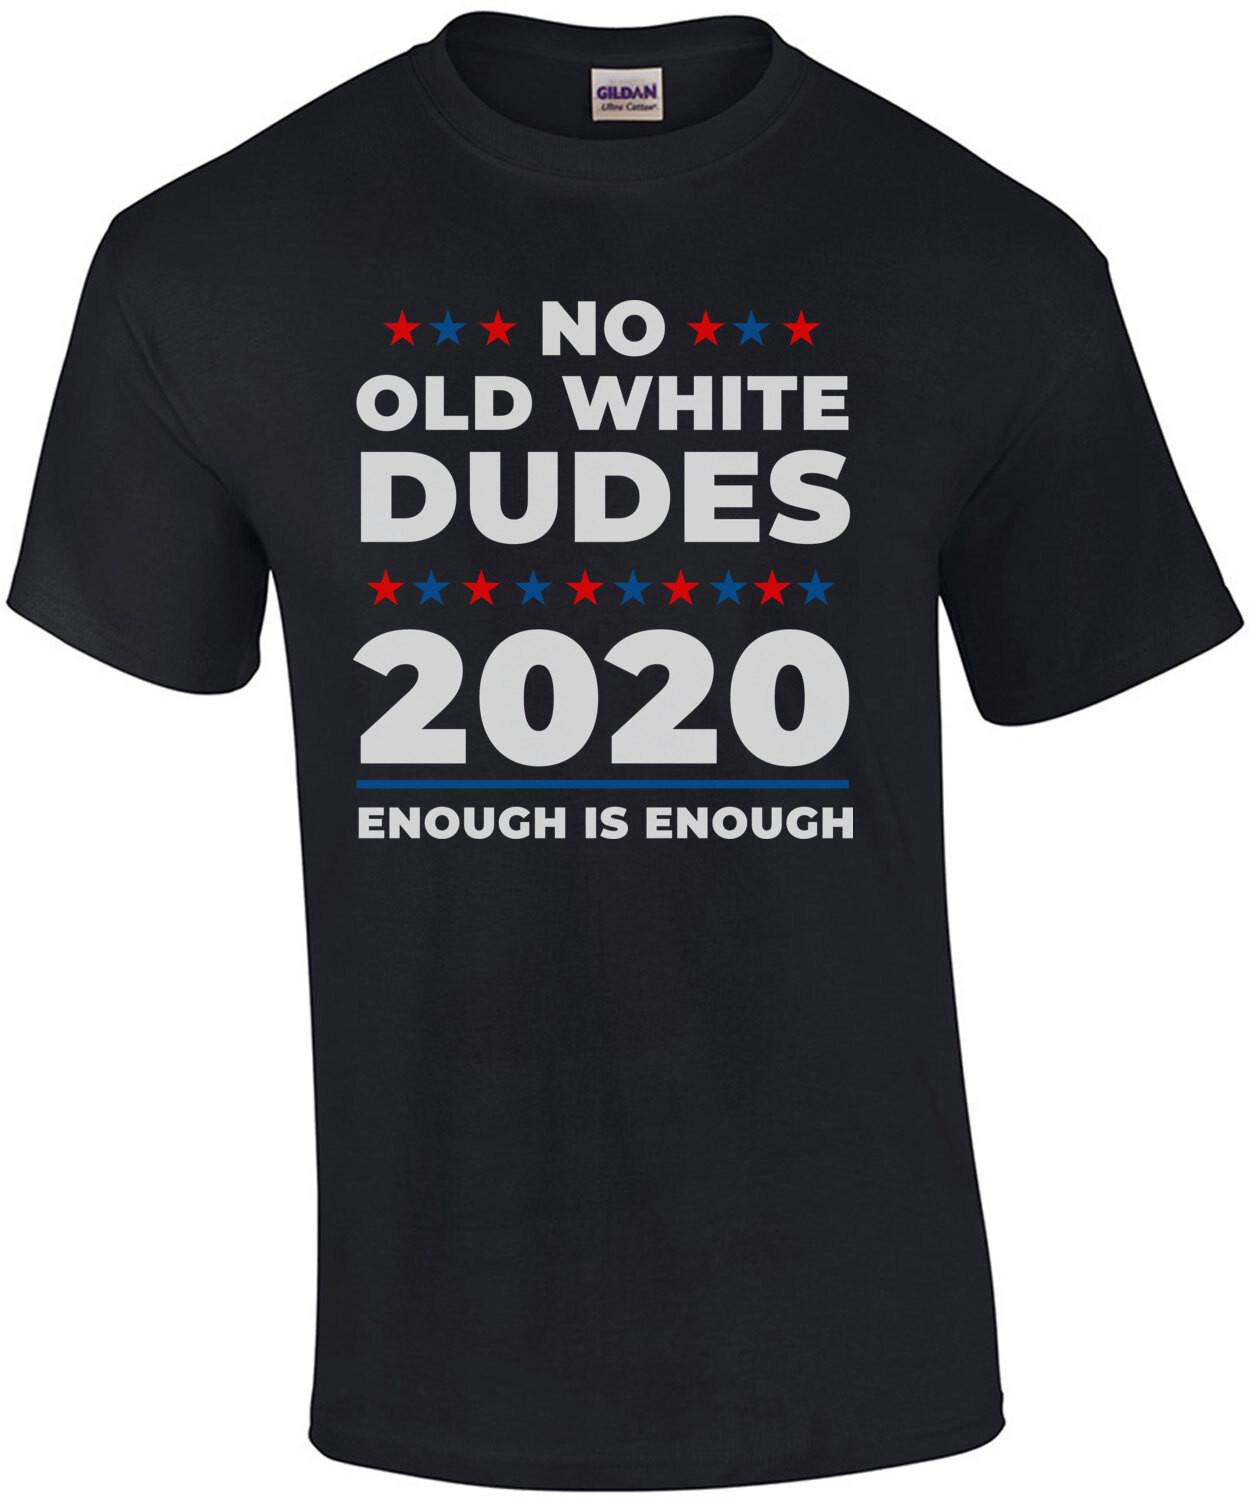 No Old White Dudes 2020 - Election Shirt